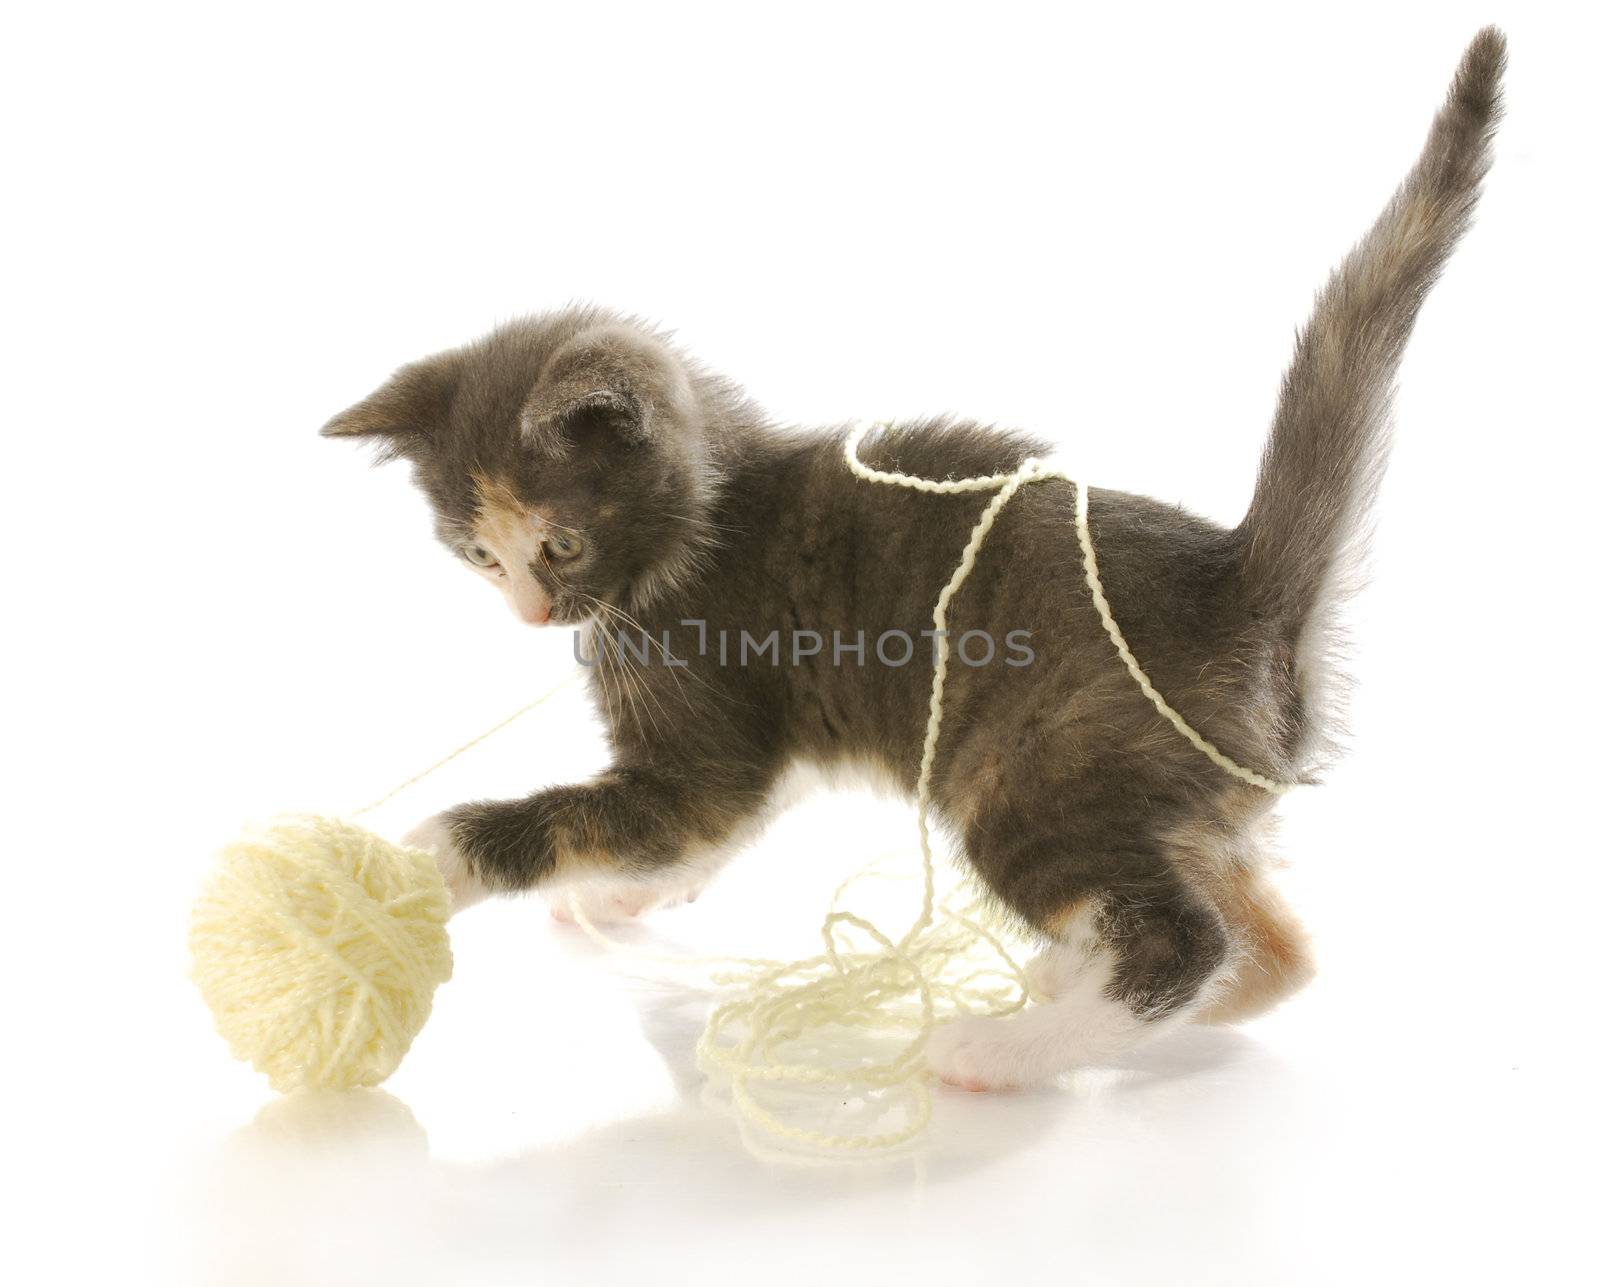 kitten playing with yarn by willeecole123